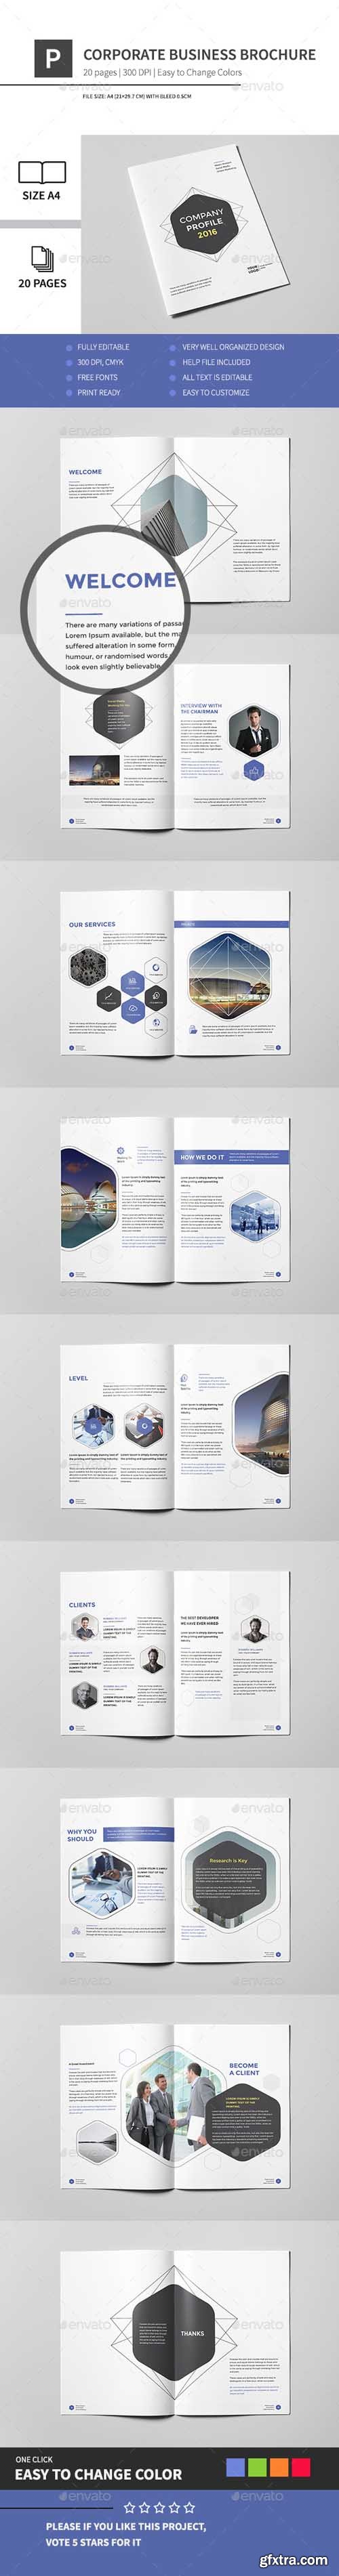 GR - Corporate Business Brochure 20 Pages A4 14681663